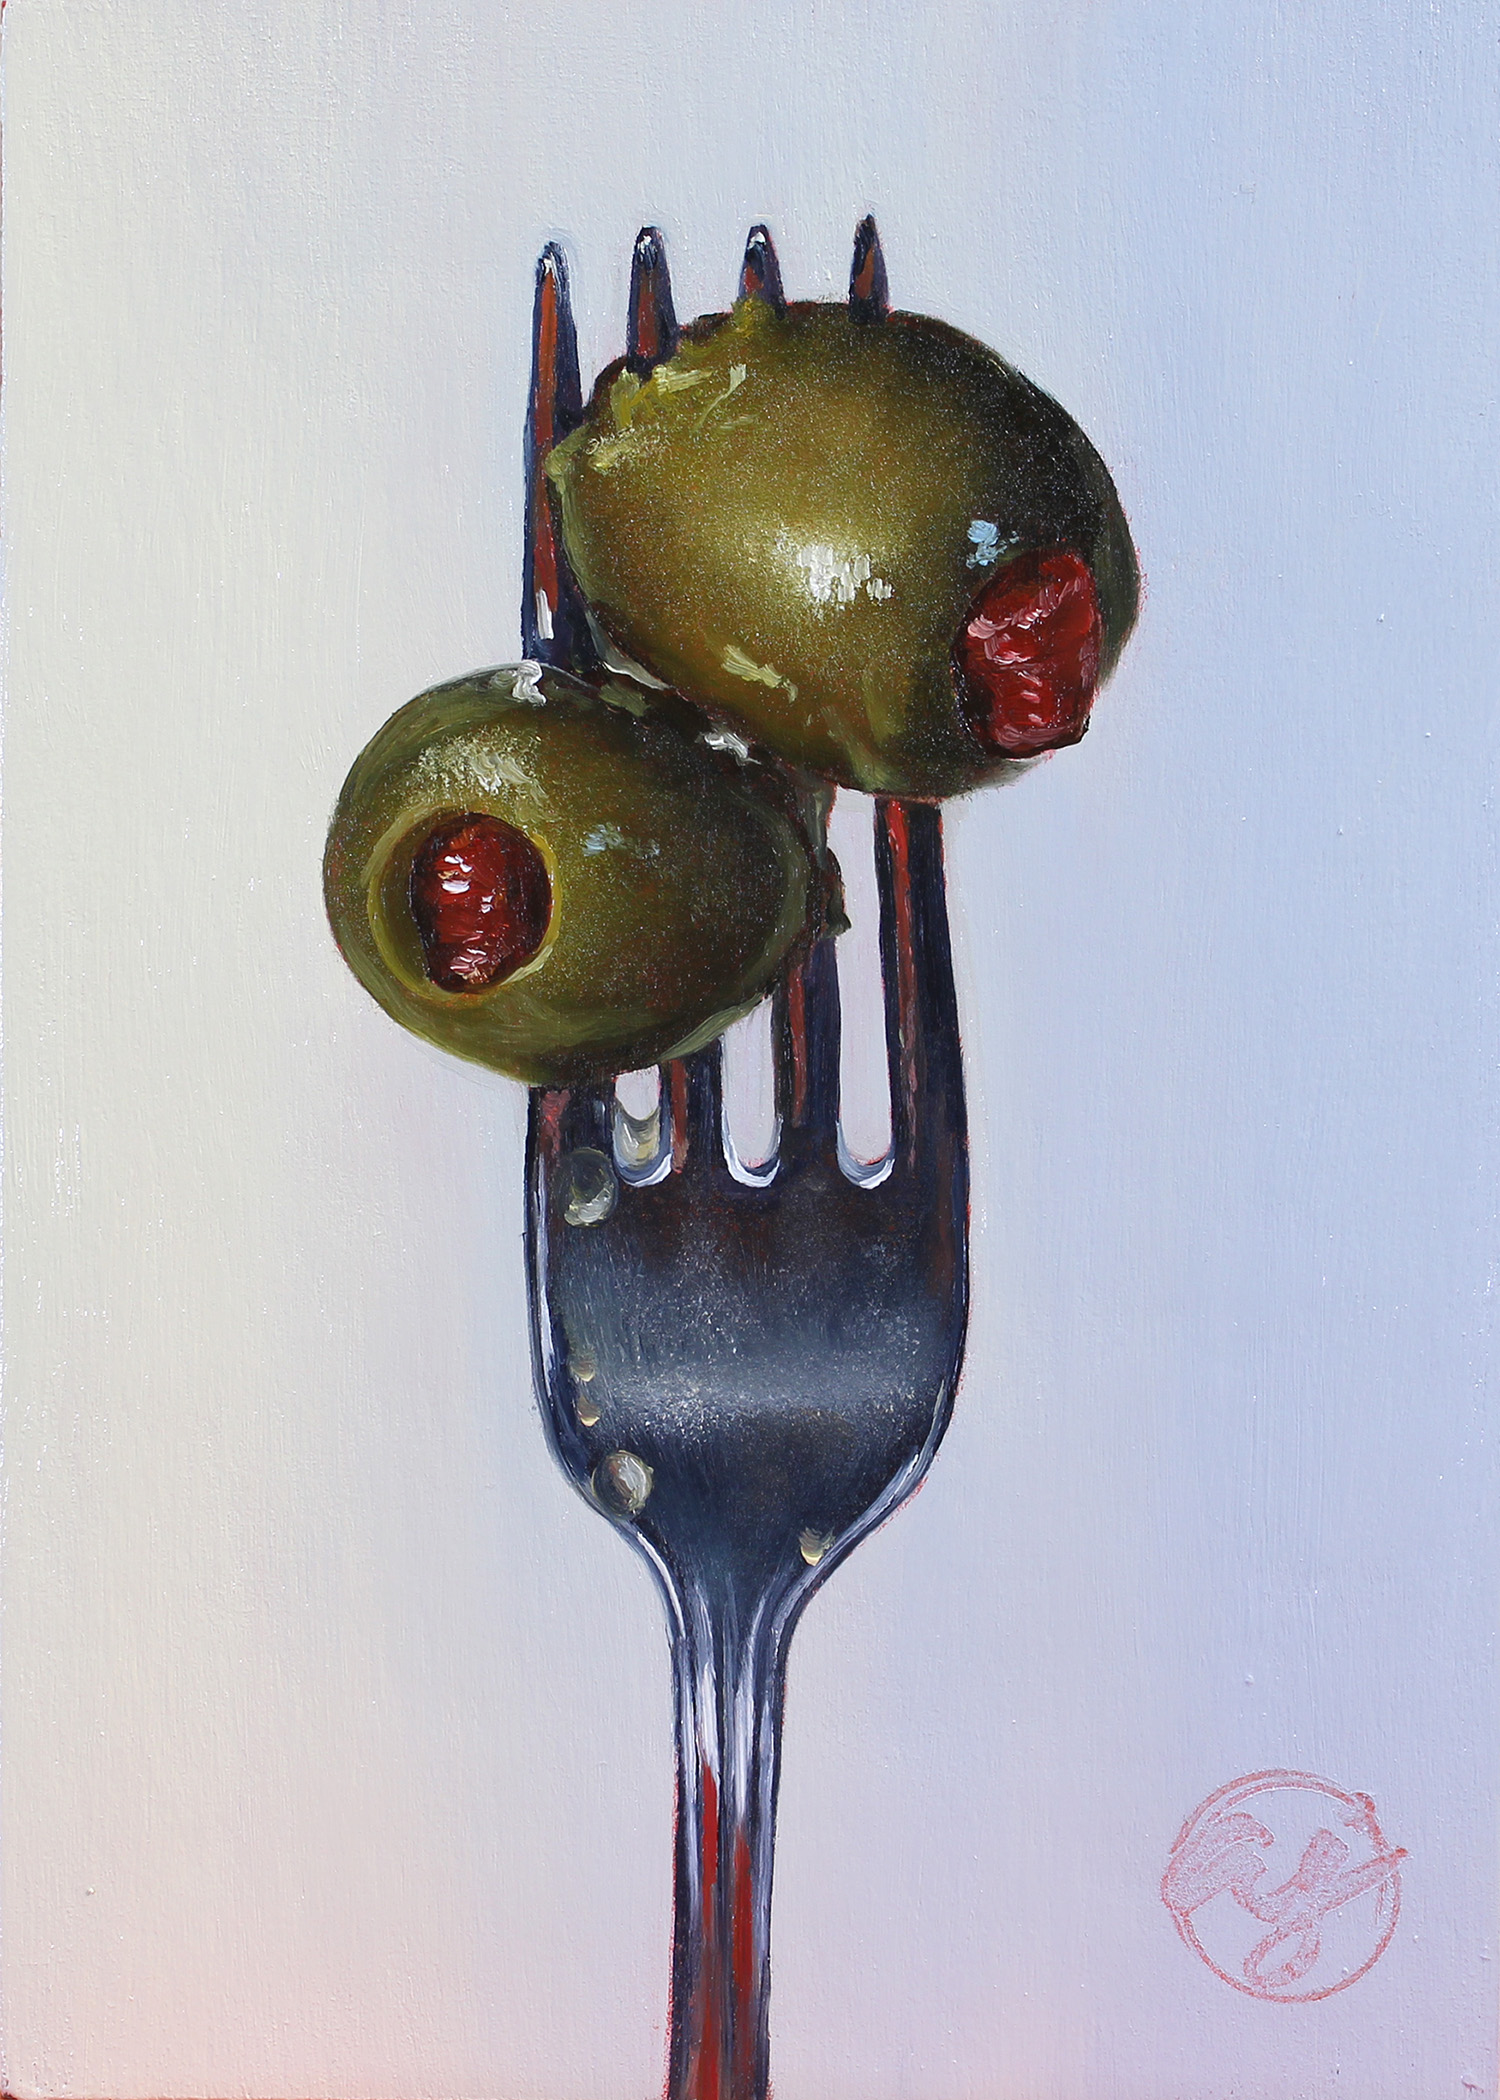 "Put a Fork in it: Olive III" 5x7 Original Oil Painting by Abra Johnson